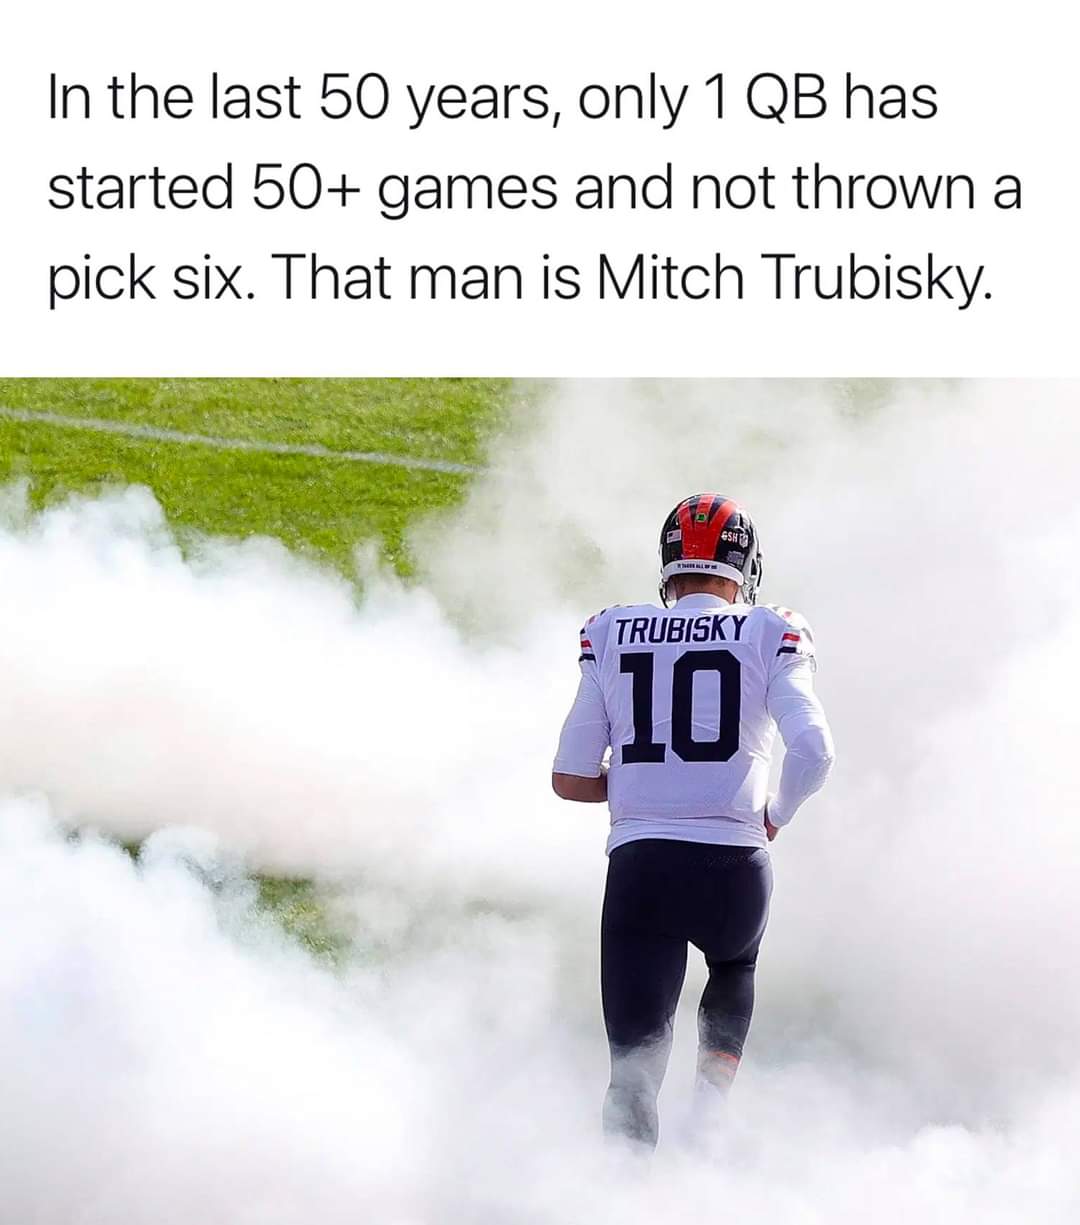 mitchell trubisky getty - In the last 50 years, only 1 Qb has started 50 games and not thrown a pick six. That man is Mitch Trubisky. 45H Trubisky 10